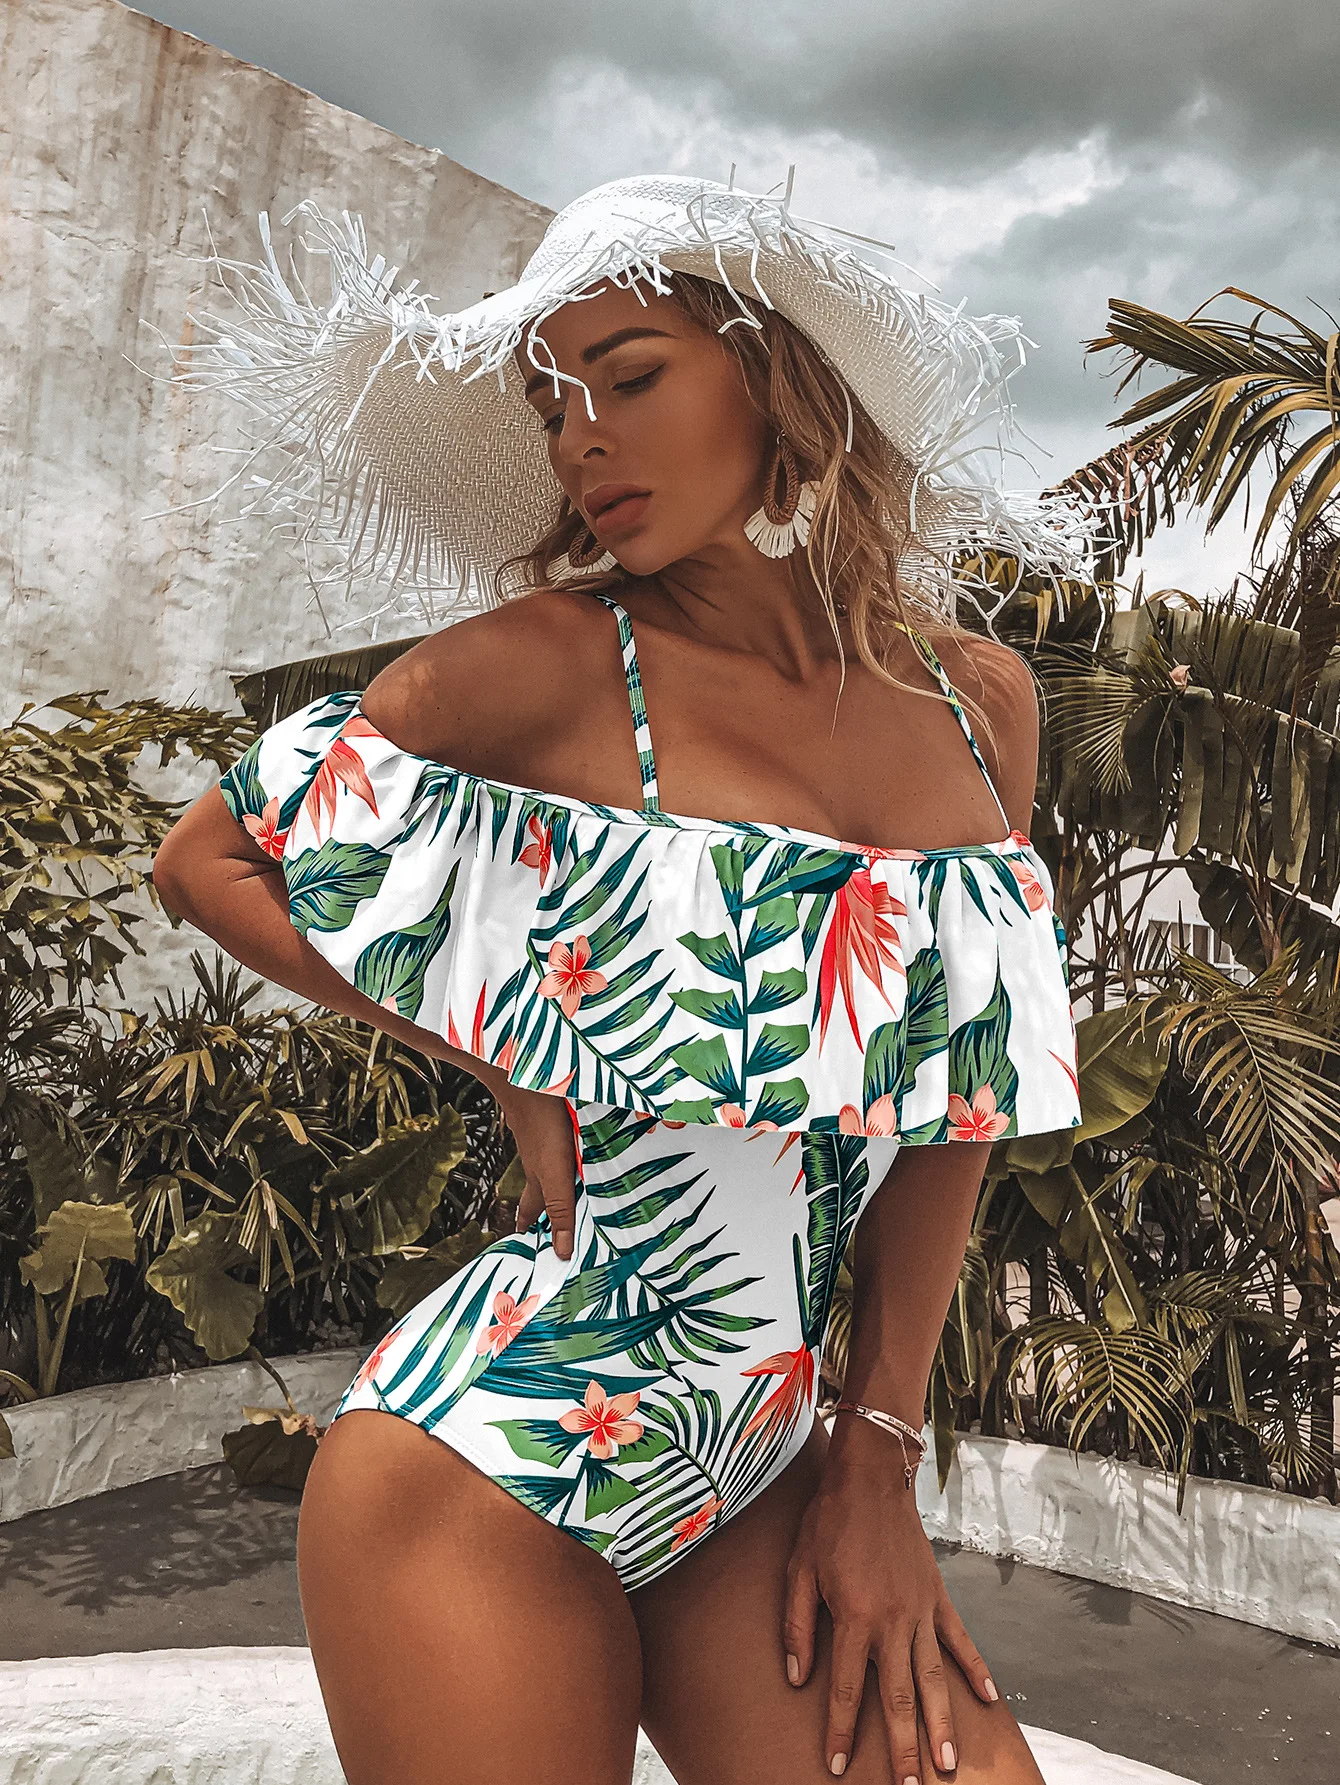 

Woman Plus size Swimsuit 2021 One Piece Floral Bathing Suit for Women Big Leaf Beach Swimming Vintage Bather Female Swimwear